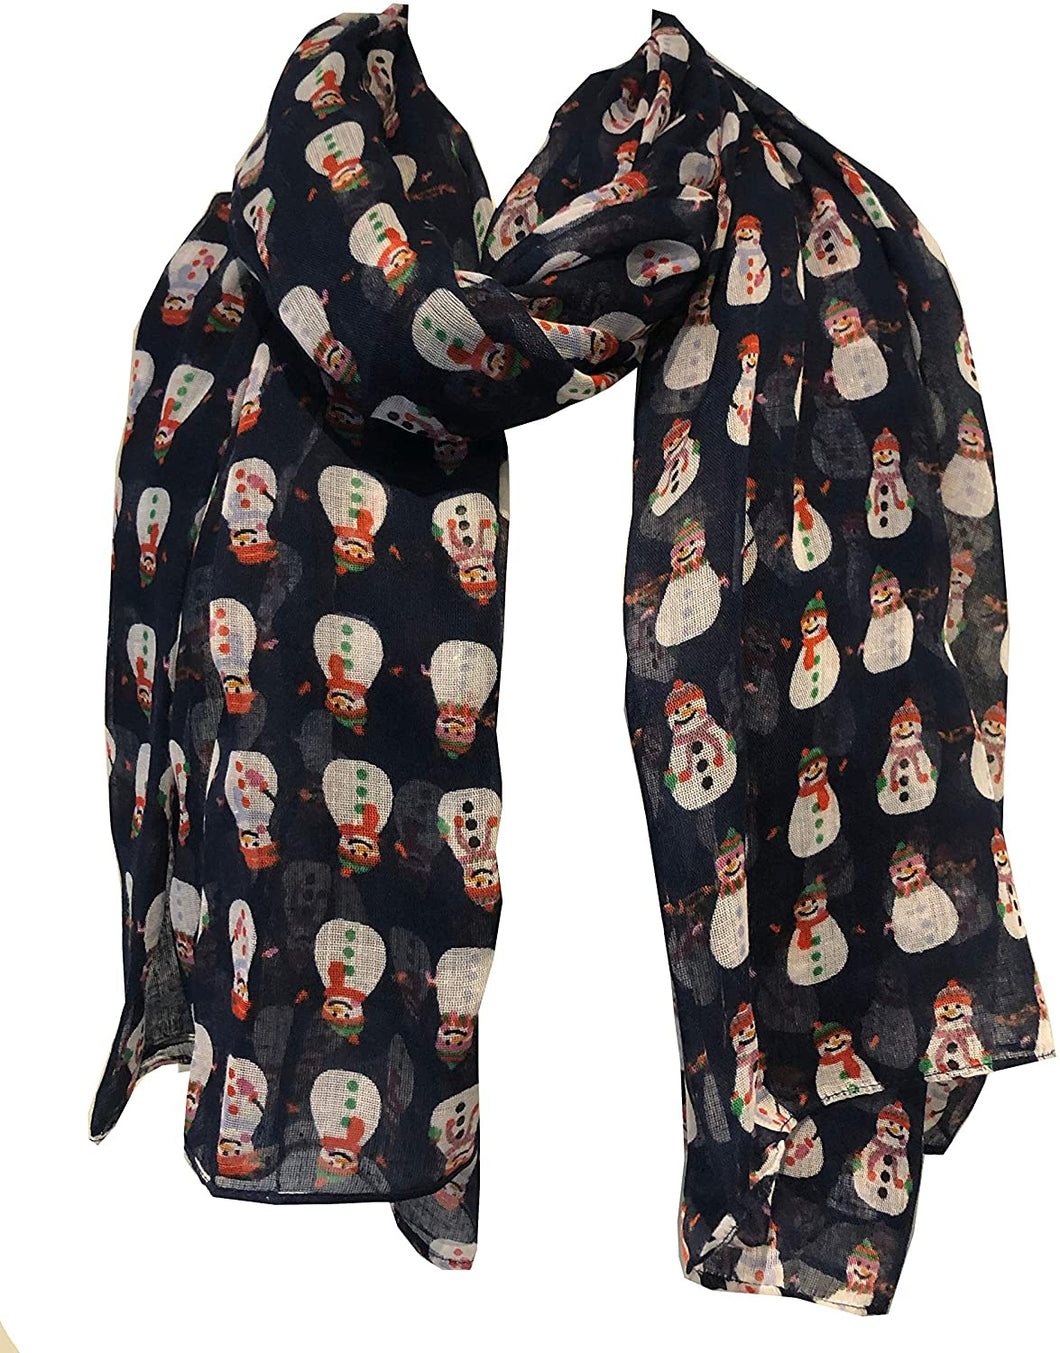 Blue Snowman Design Ladies Scarf. Great Christmas Scarf/wrap Lovely Present.